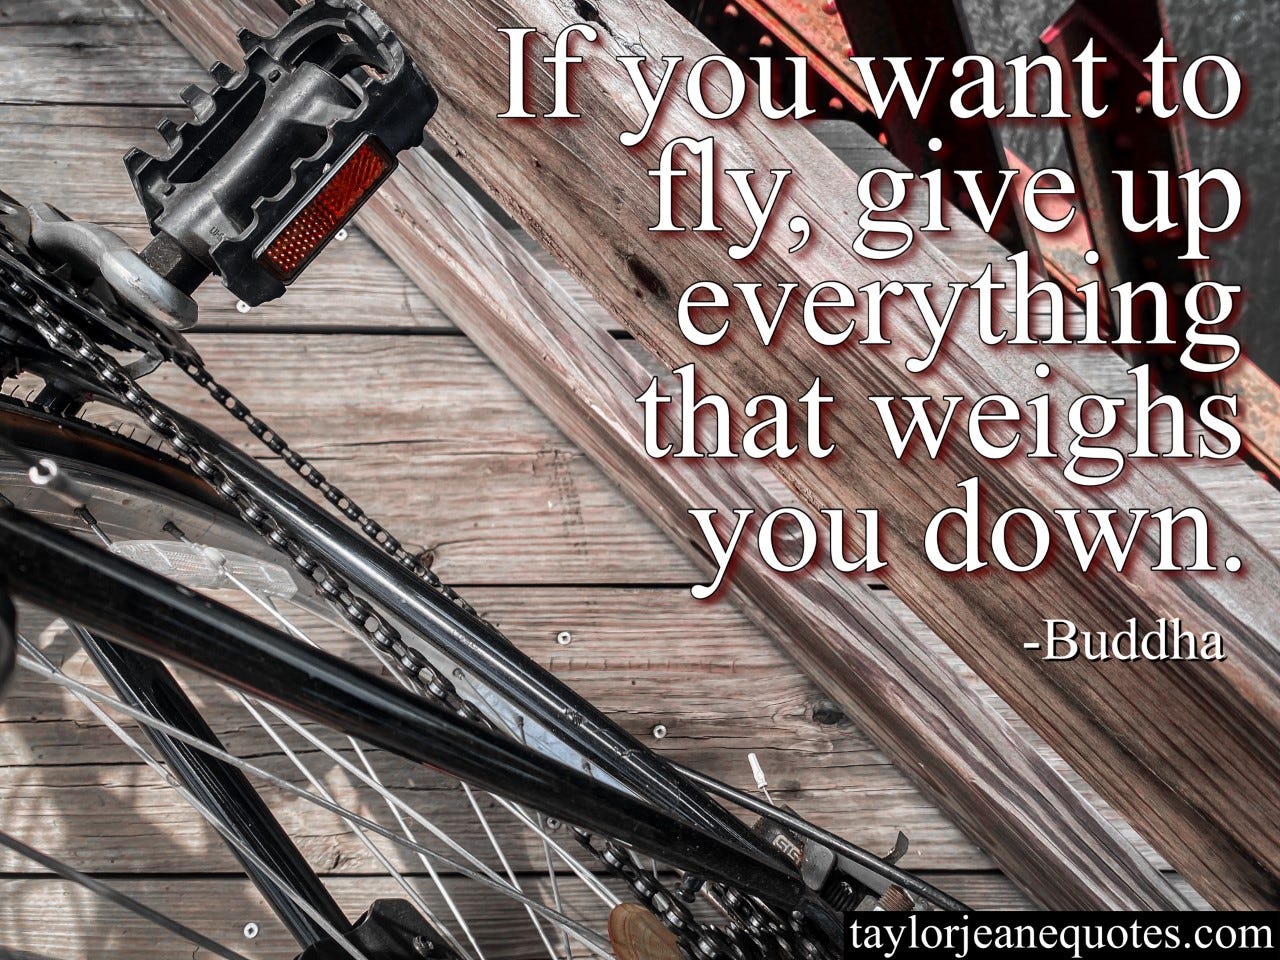 taylor jeane quotes, taylor jeane, taylor wilson, buddha, buddha quotes, flying quotes, fly quotes, inspirational quotes, motivational quotes, bike on bridge, massachusetts, if you want to fly give up everything that weighs you down quote, risk quotes, chance quotes, goal quotes, sacrifice quotes, goal achievement quote of the day, personal development quote of the day